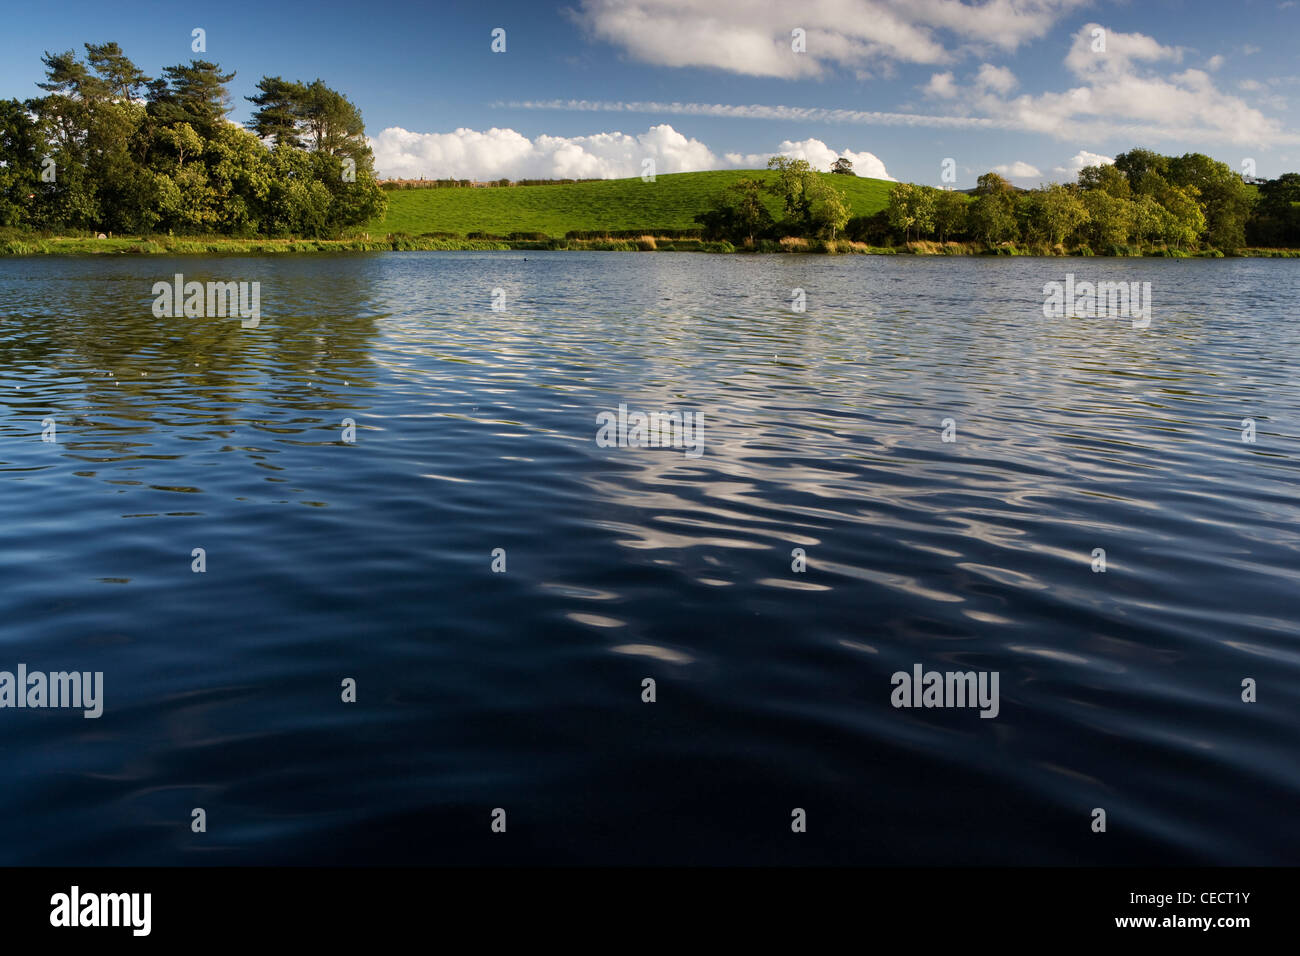 View across the water of Carlingwark Loch towards the lush green grassy bank and trees opposite. Stock Photo